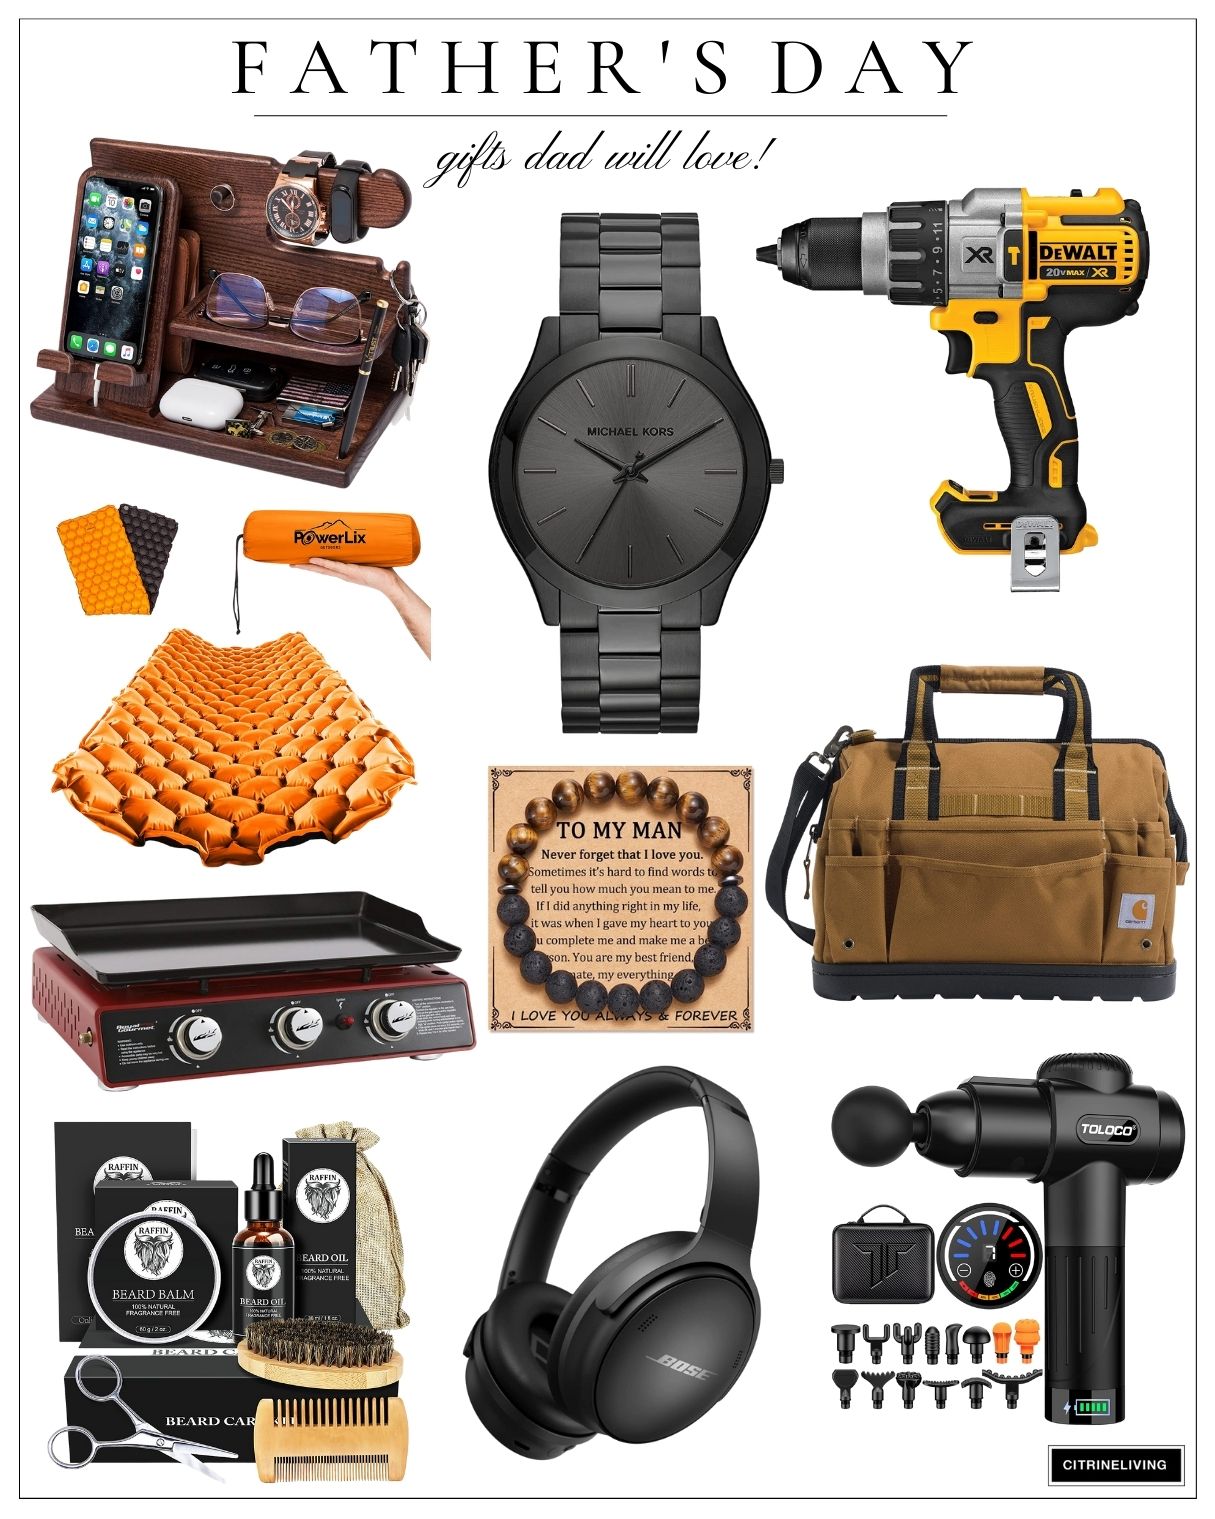 Father's Day gift ideas all from Amazon.